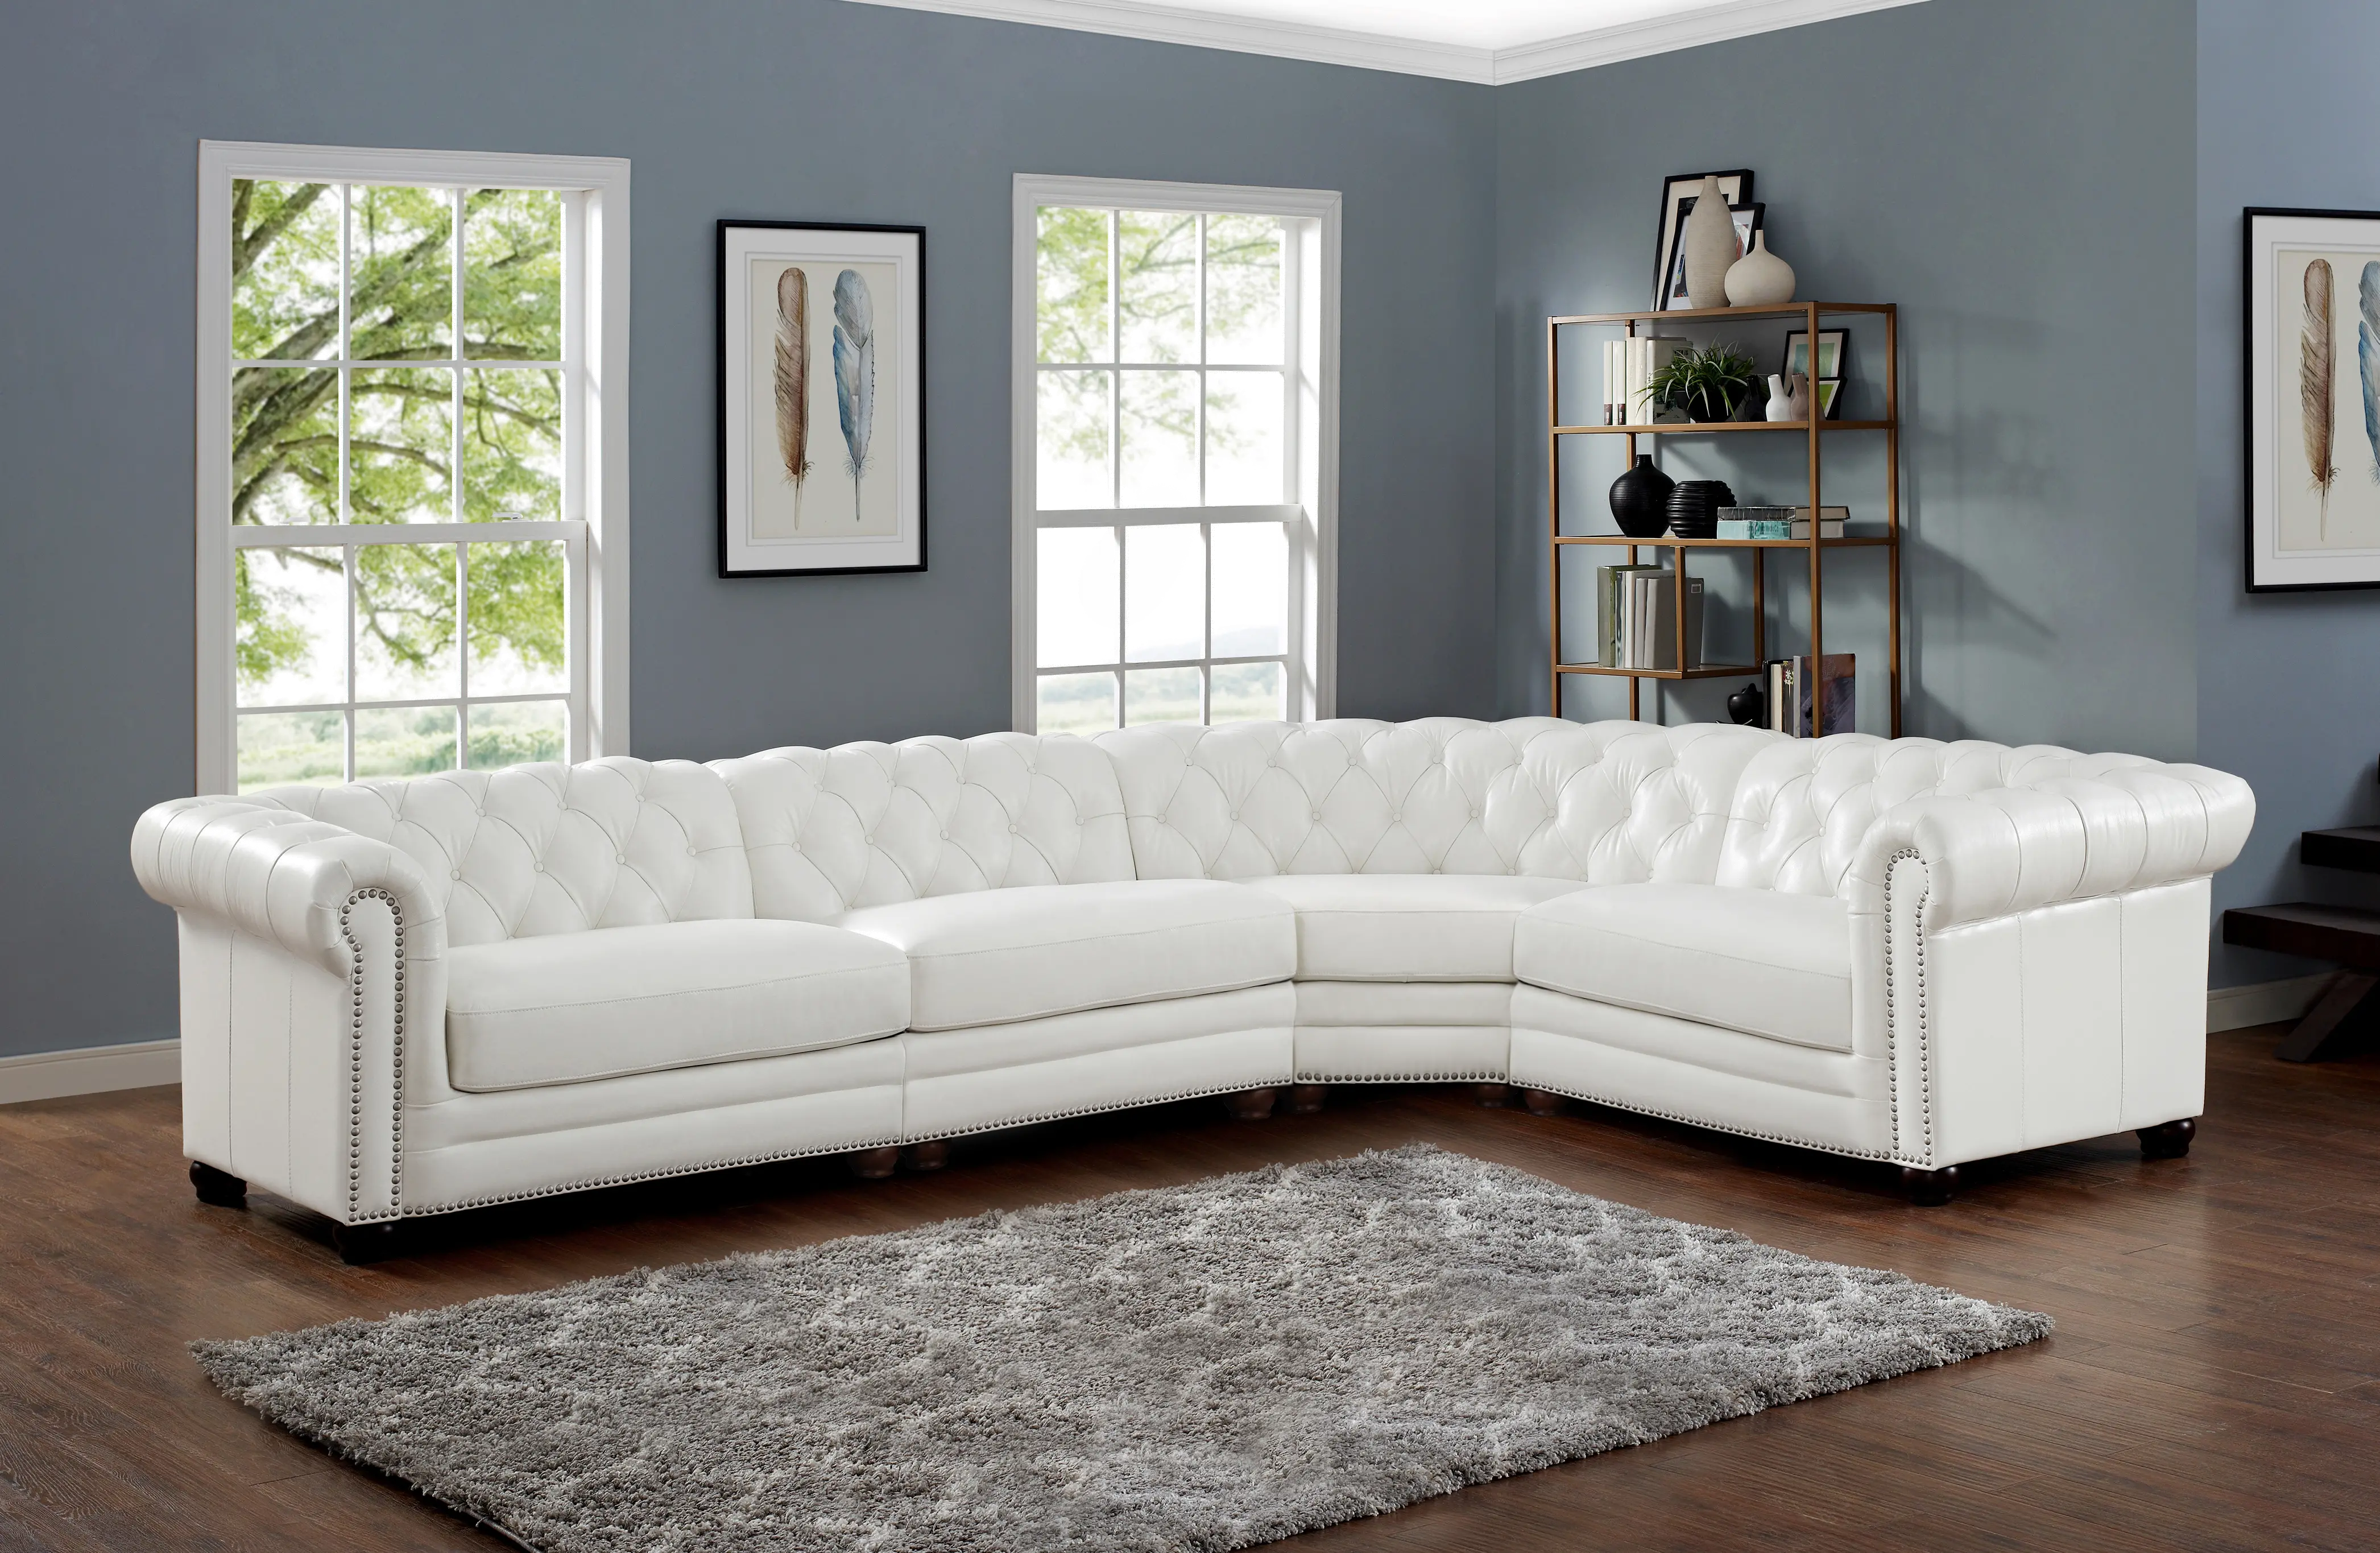 6988-SECT4-2175 Kennedy White Leather 4 Piece Sectional - Amax Lea sku 6988-SECT4-2175